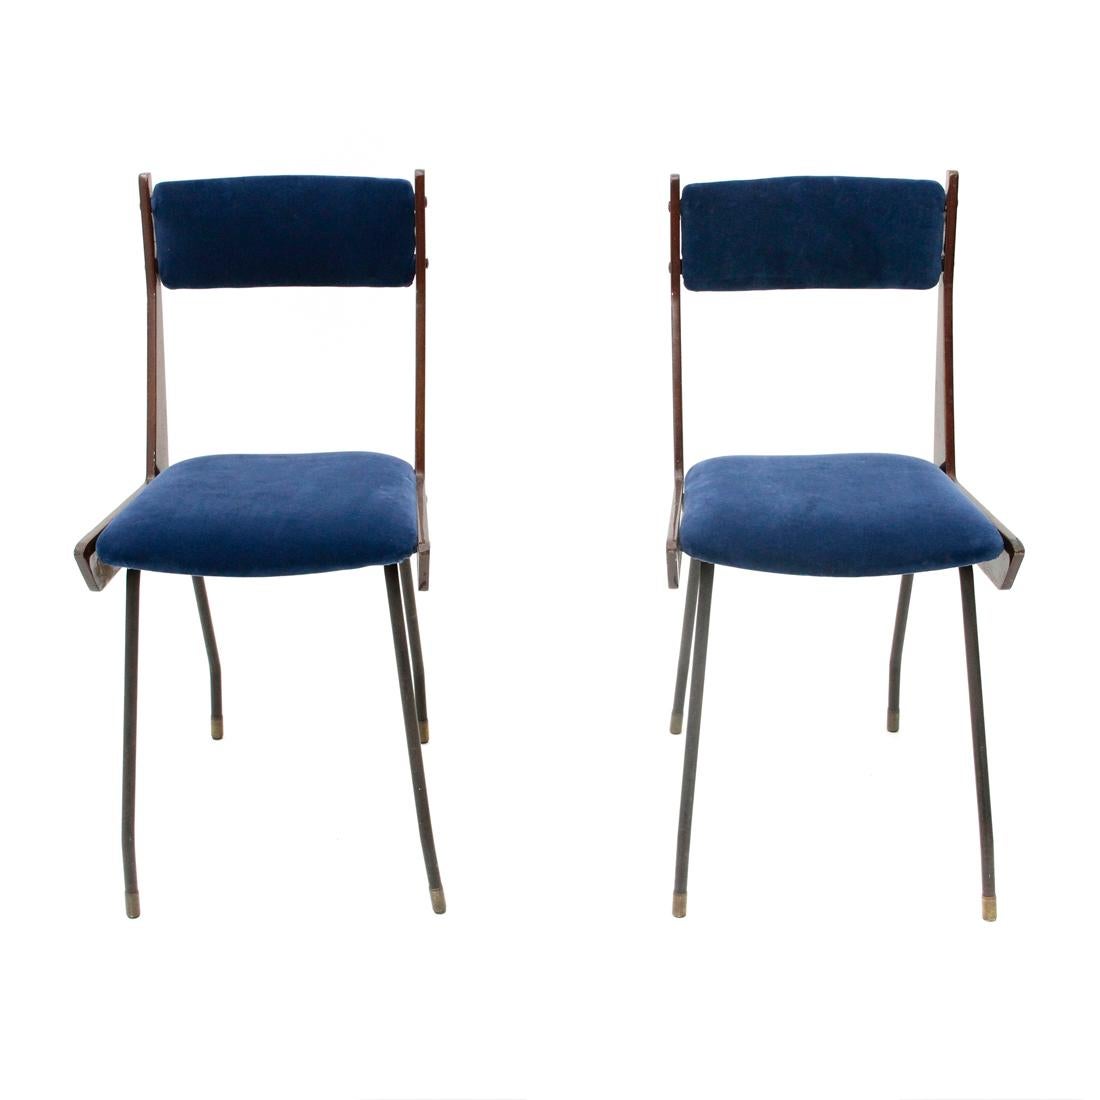 Mid-20th Century Pair of Midcentury Italian Blue Velvet Dining Chair by RB Rossana, 1950s For Sale